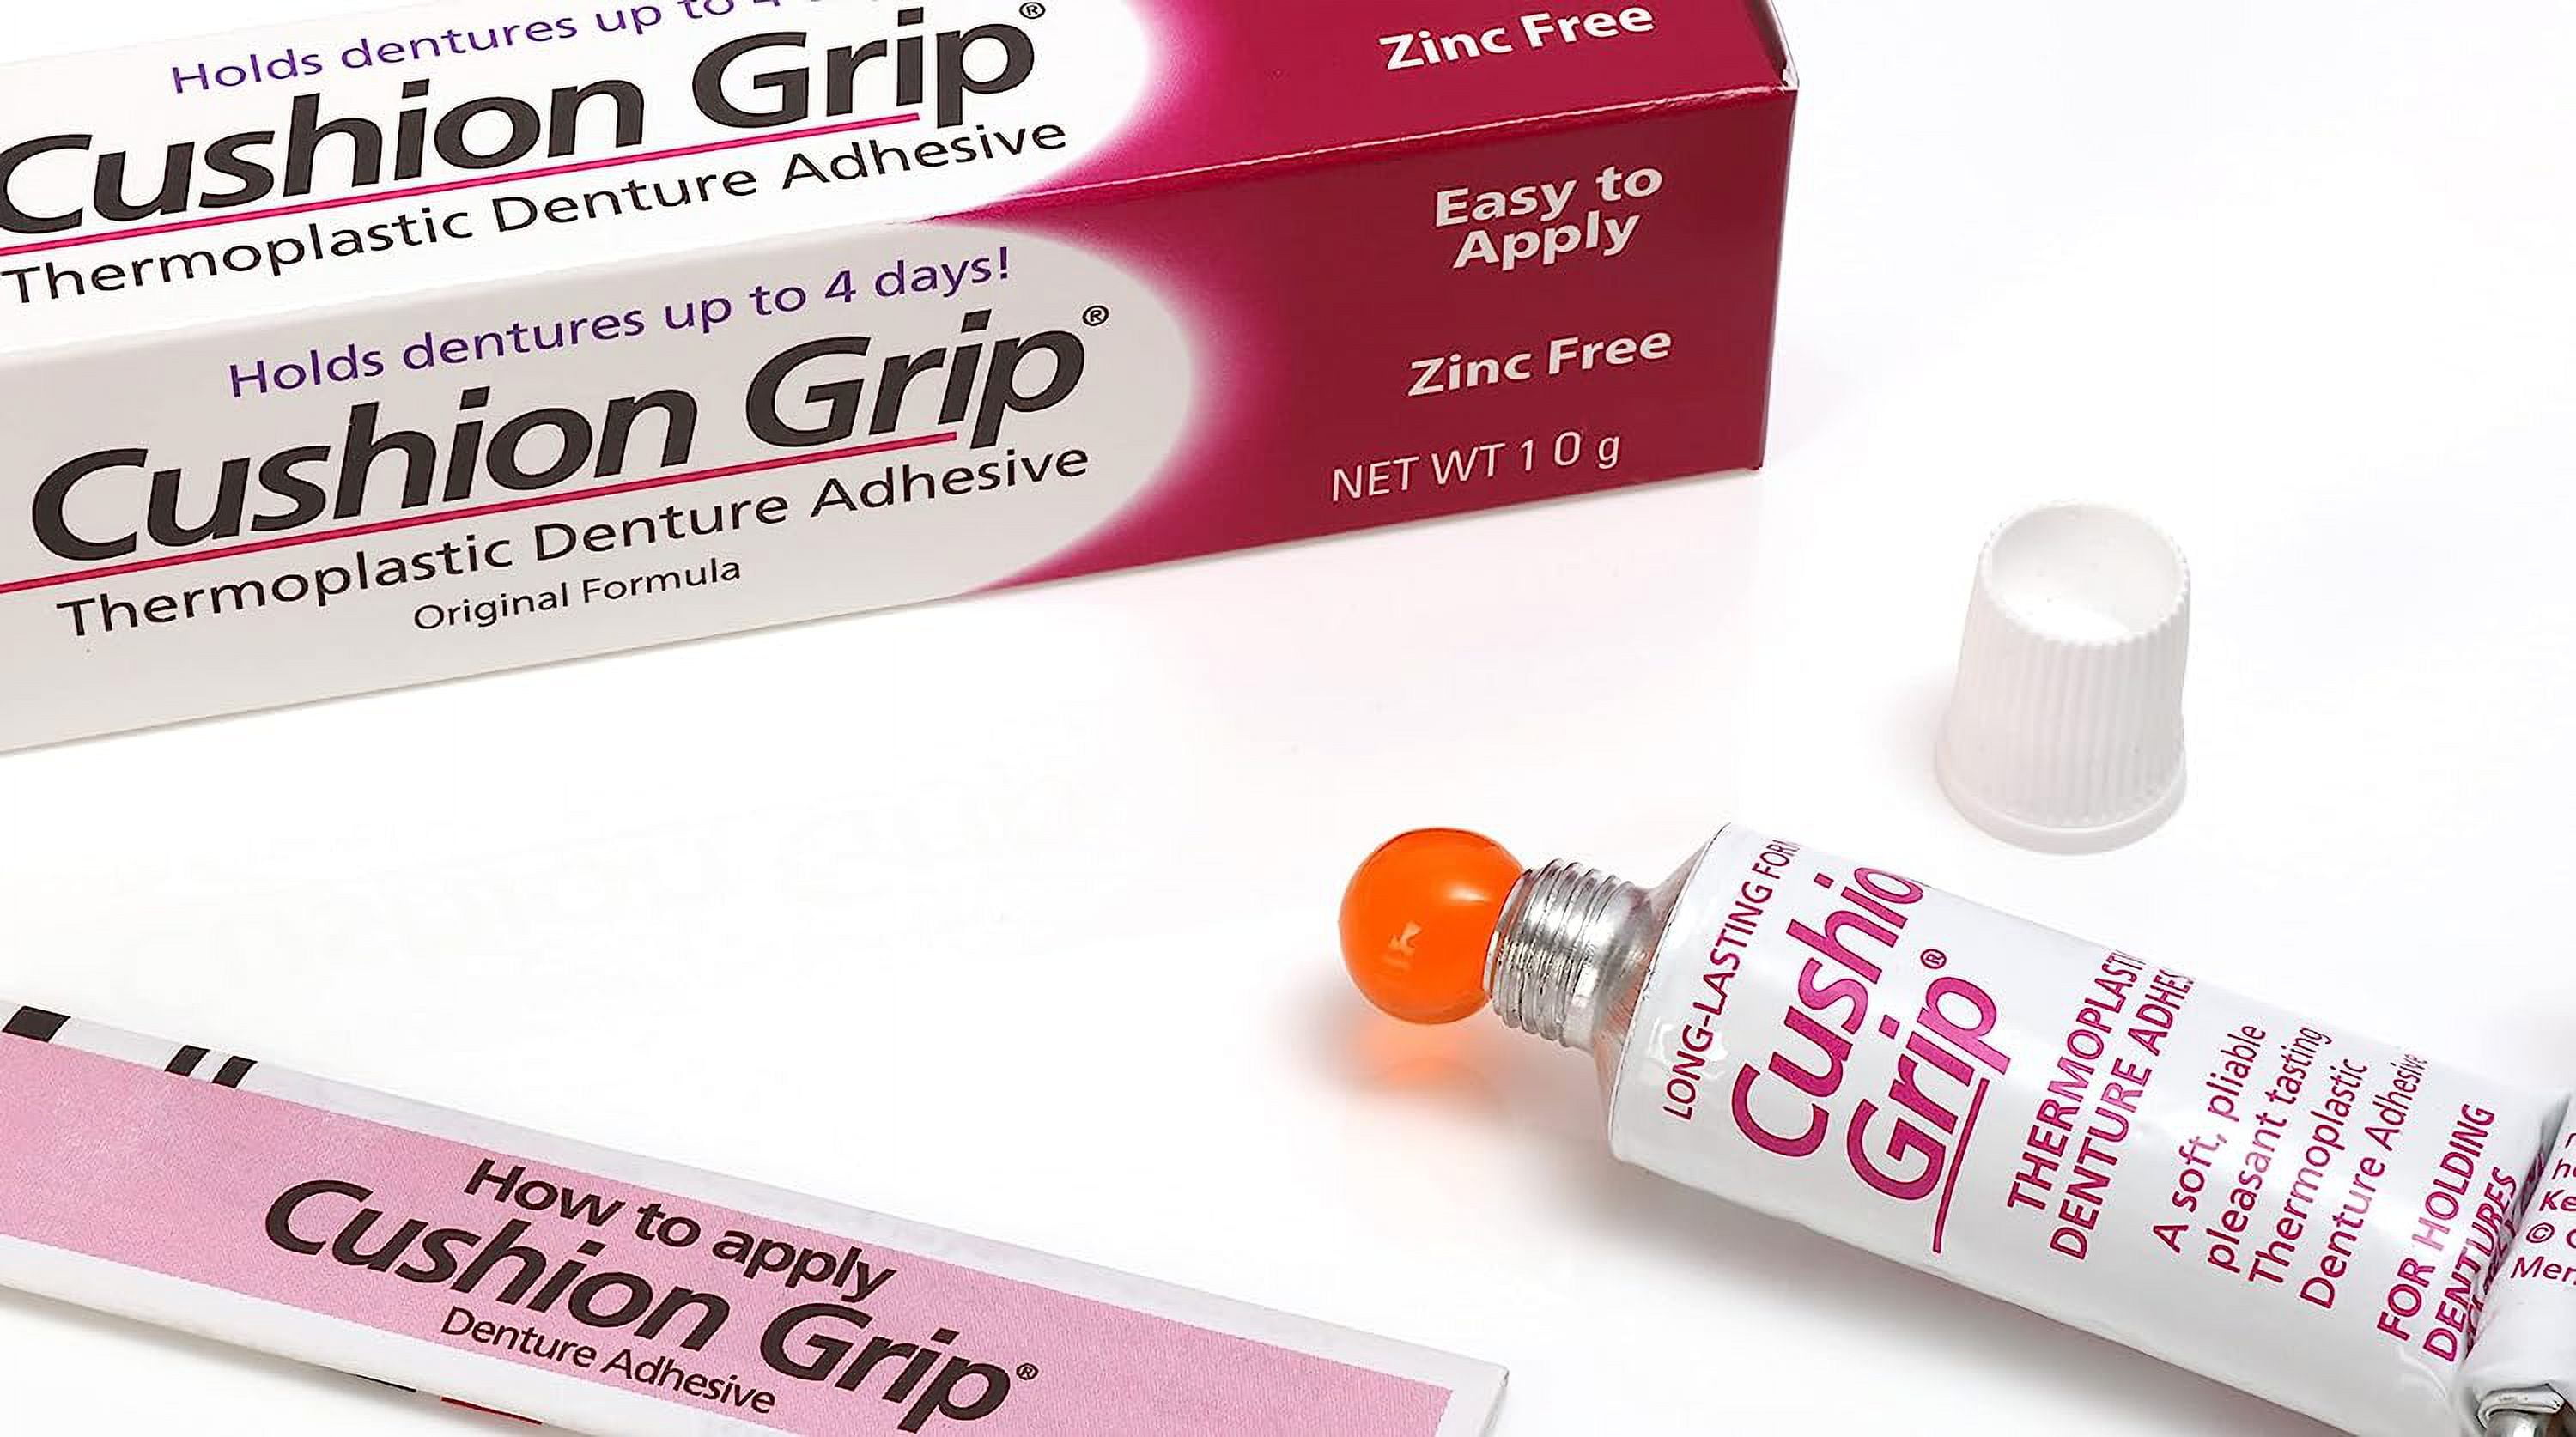 My Cushion Grip - Dentures loose & shifting? Try Cushion Grip! The